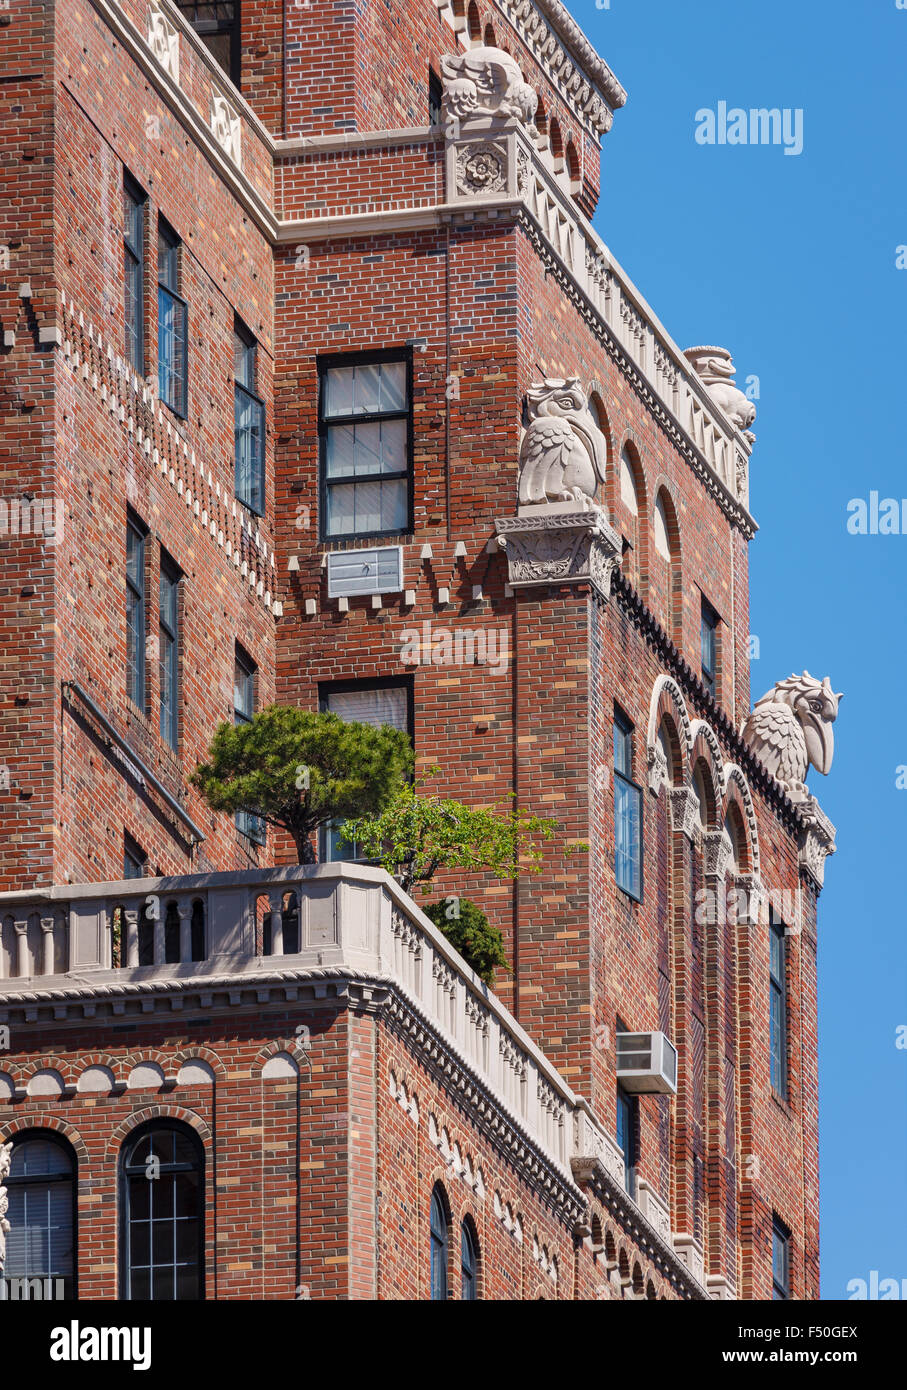 Architectural details of brick wall building with terraces and cartouches, Chelsea, Manhattan, New York City Stock Photo